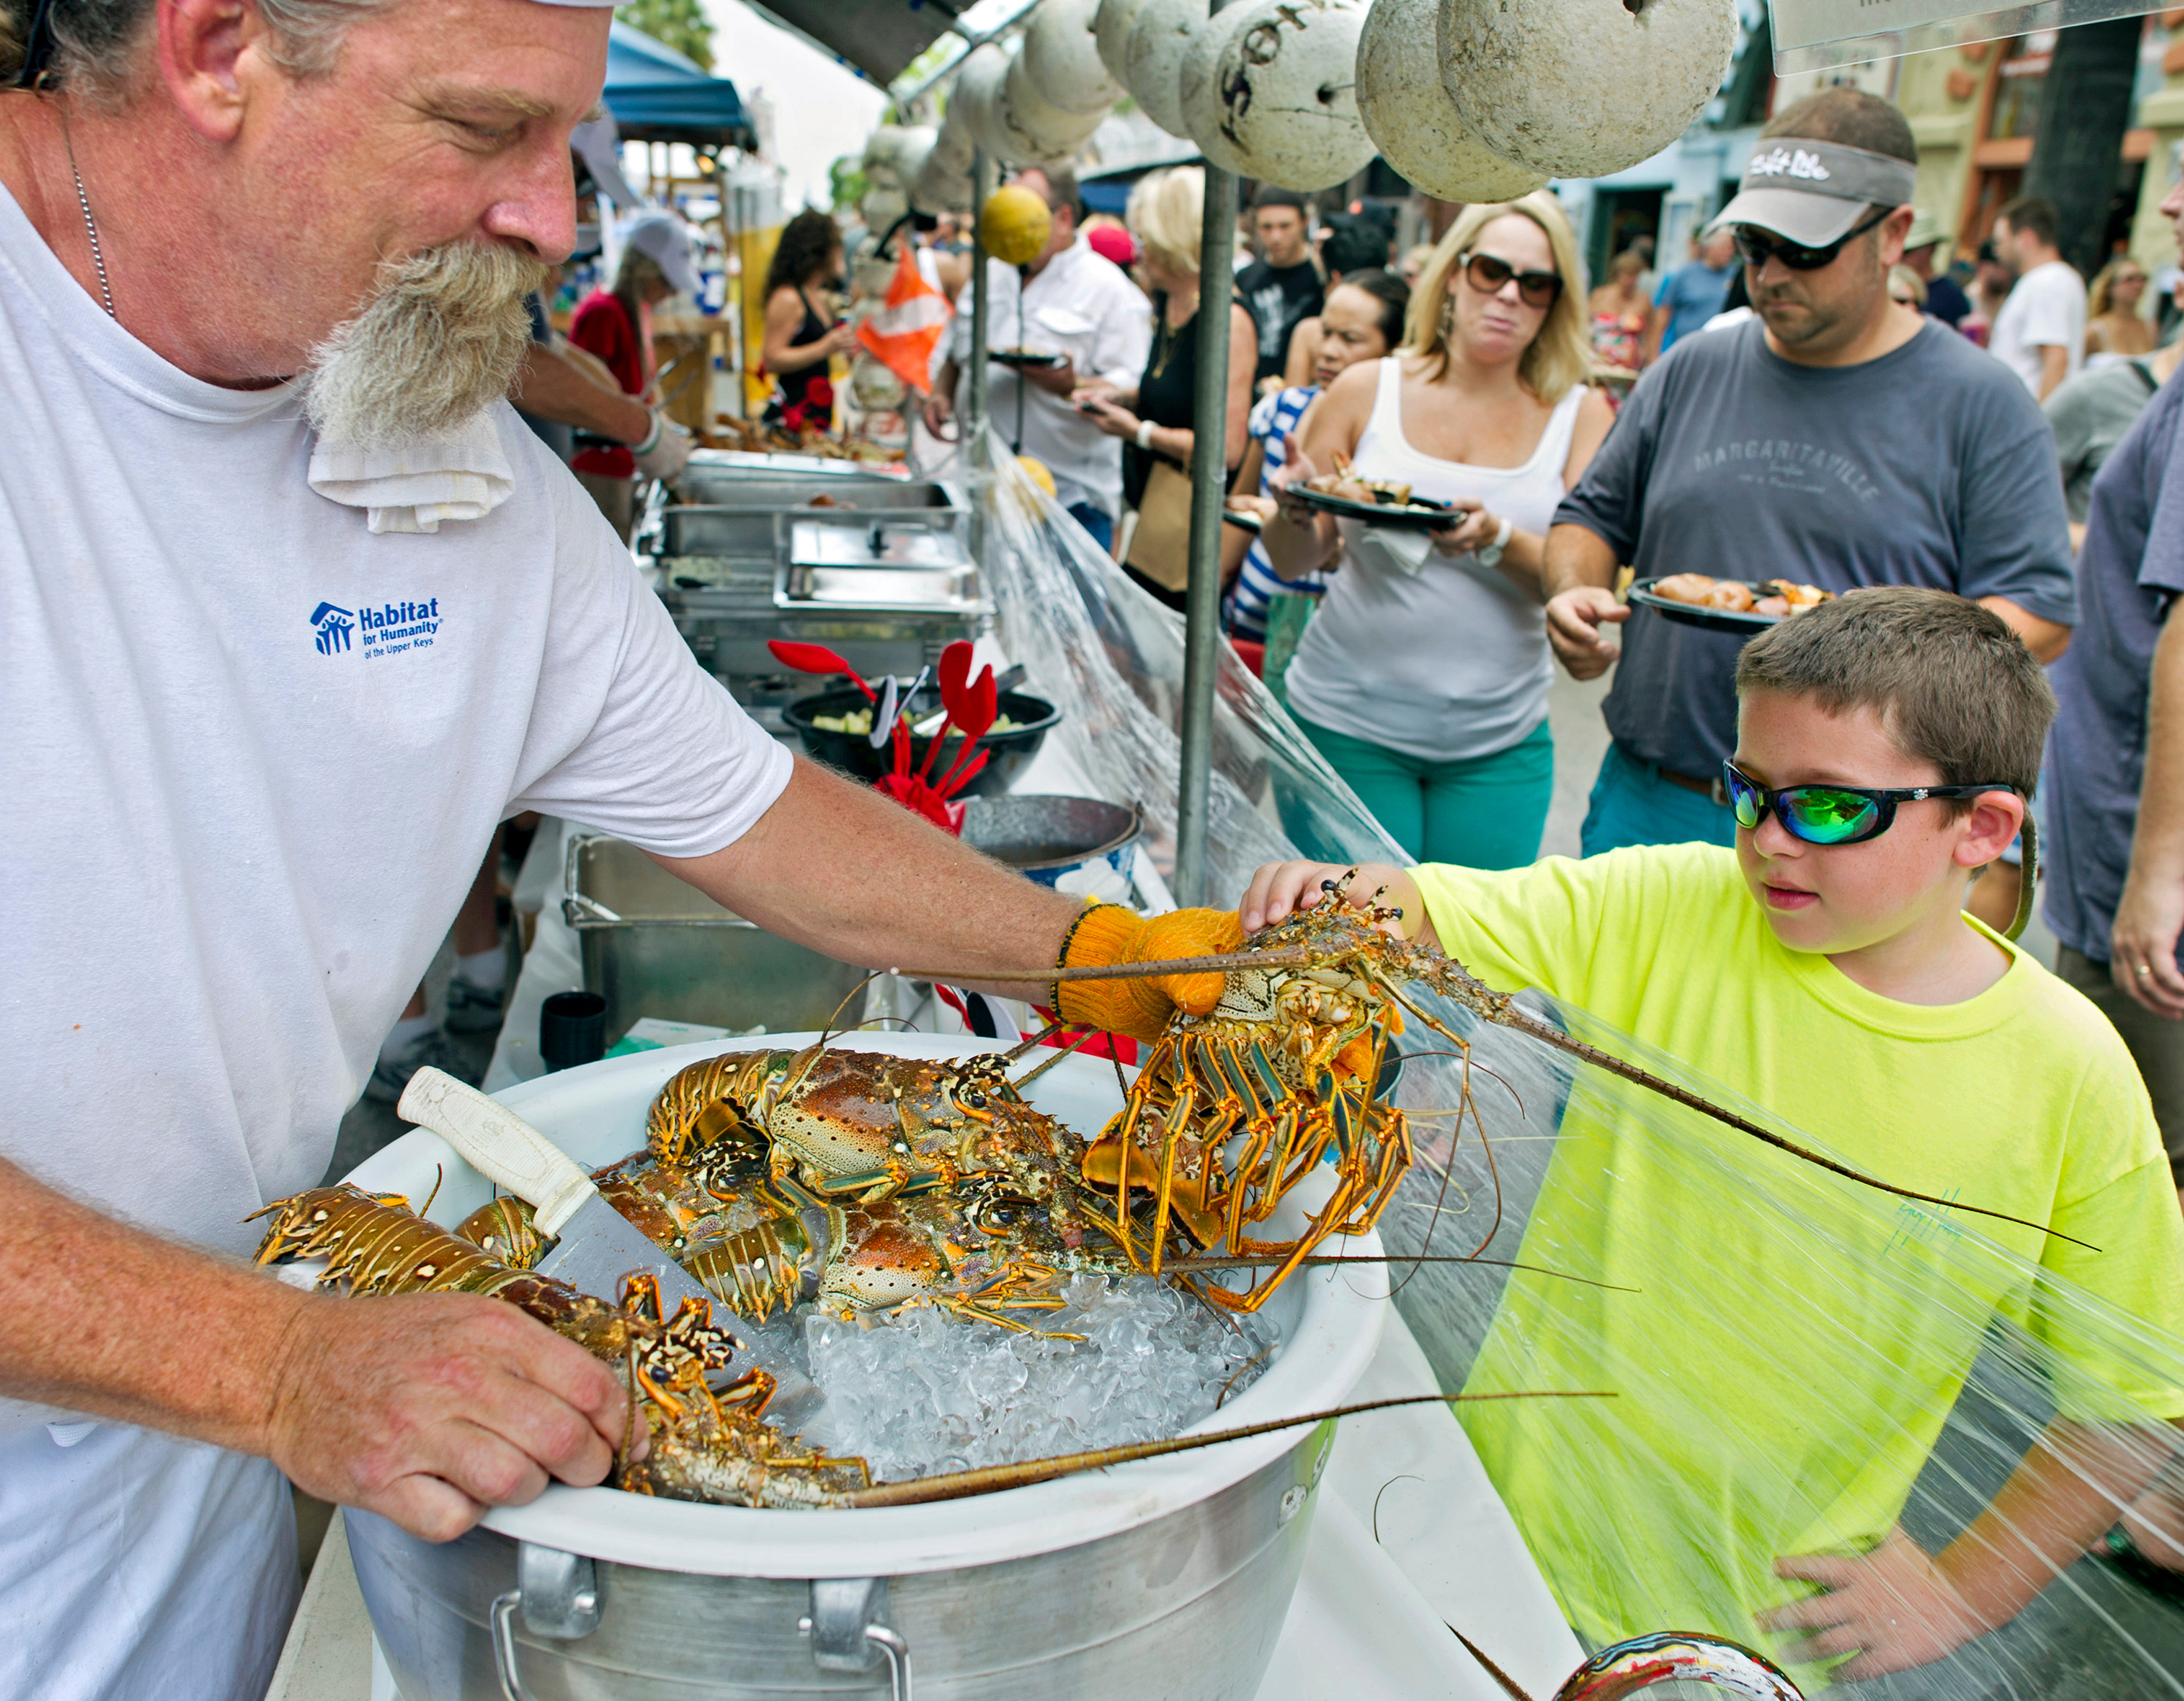 A lobster fest in Florida with an older man surving food to a young boy.